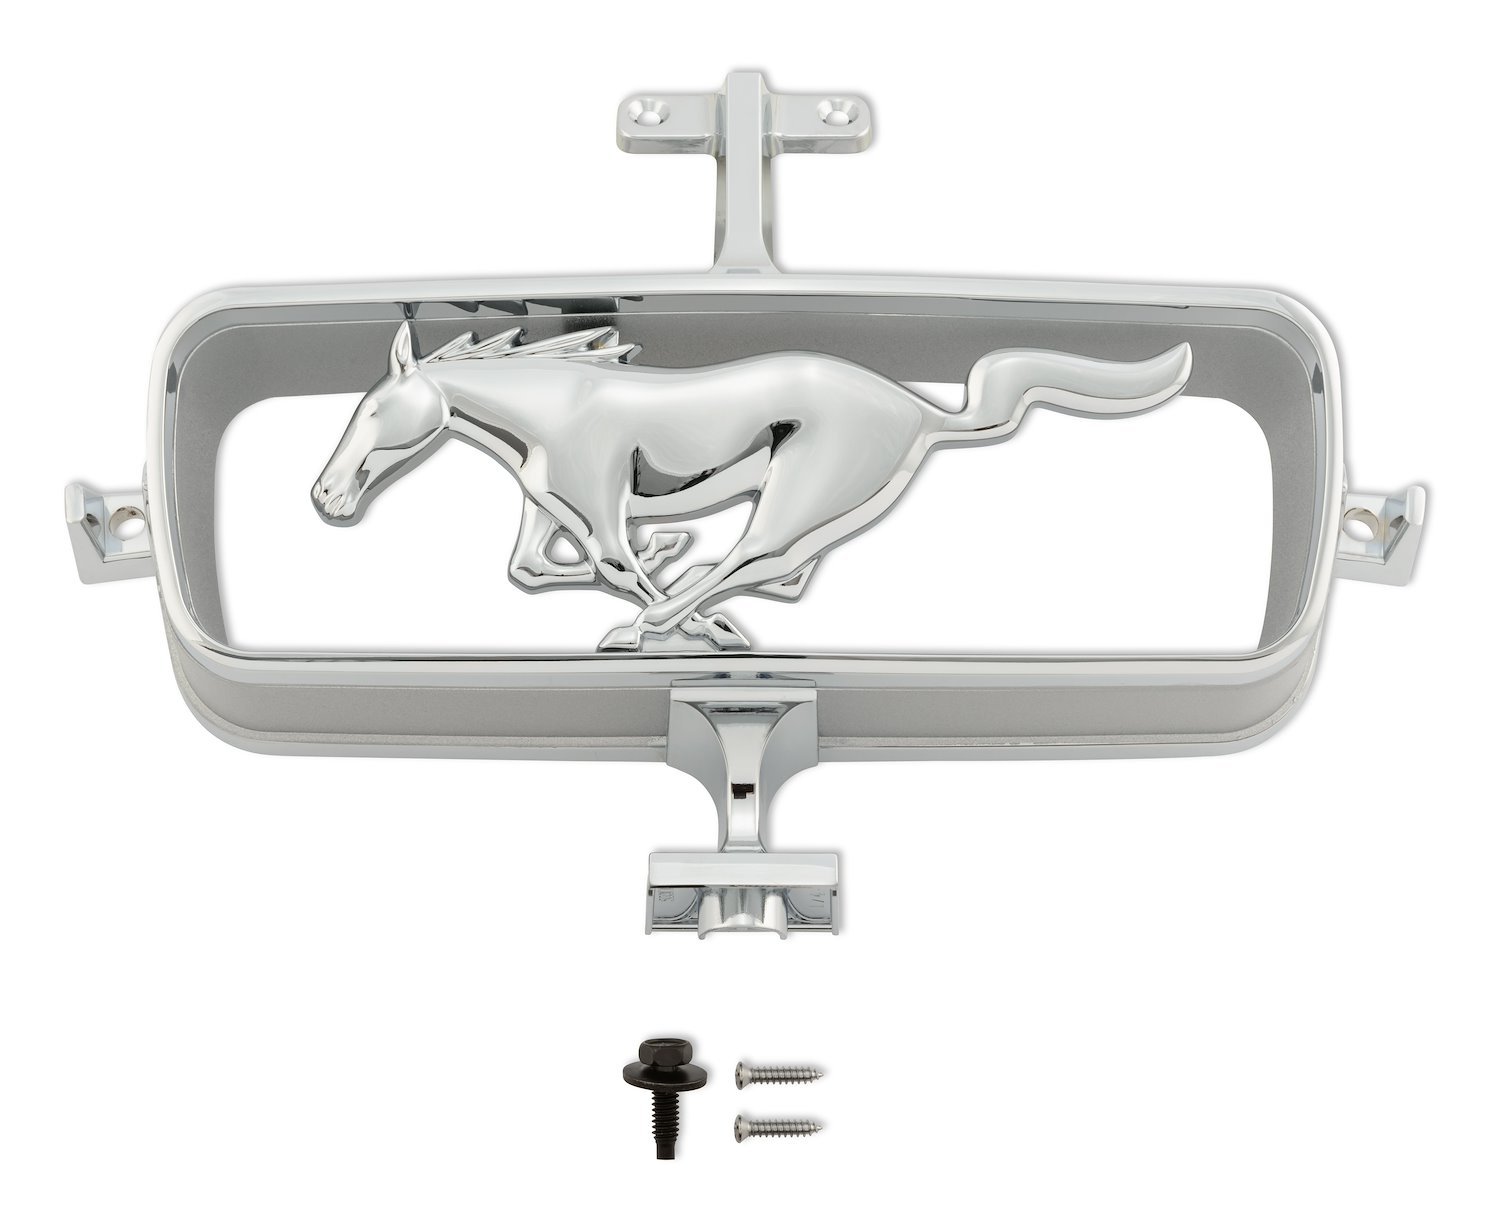 Officially-Licensed Ford Grille Emblem for 1964-1965 Ford Mustang [Right-Facing Horse and Corral Logo] Chrome